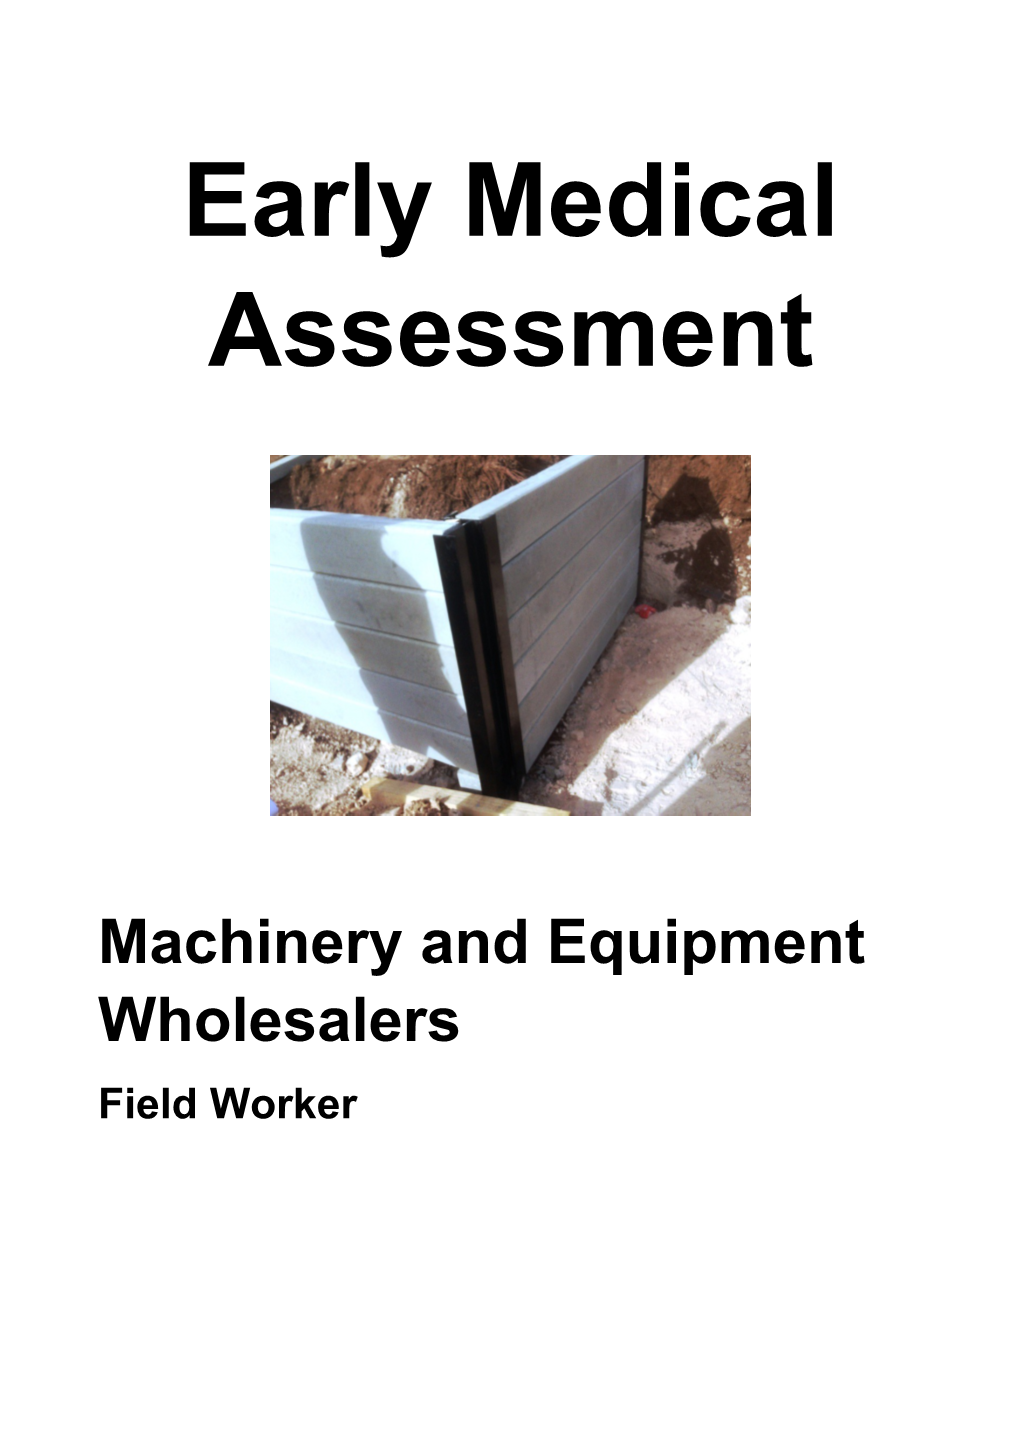 Machinery and Equipment Wholesale - Field Worker